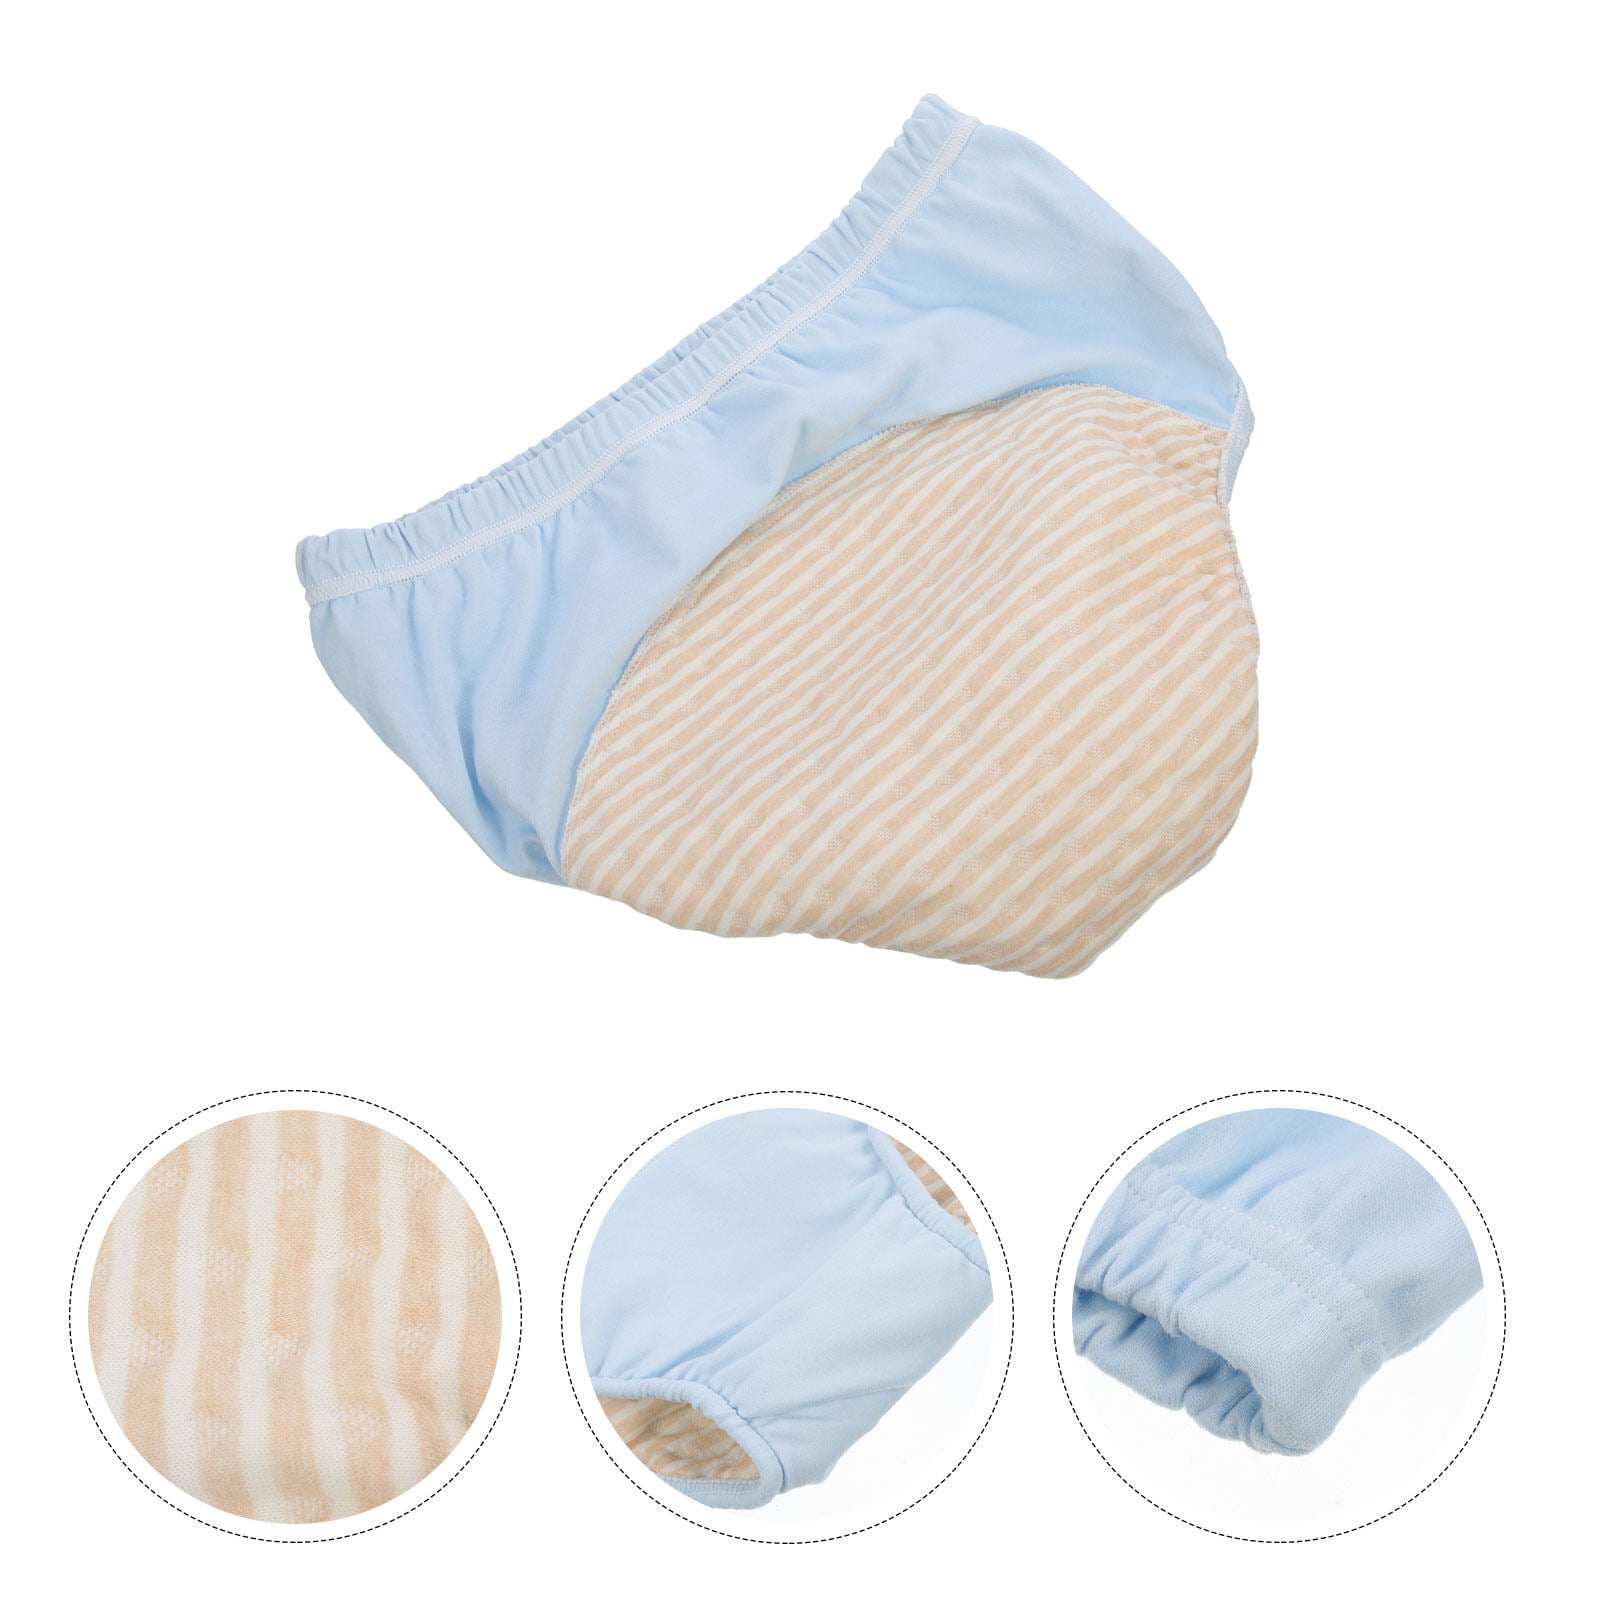 Healifty 1pc Elderly Anti- Adult Pants for Incontinence Washable  Incontinence Underwear Women Adult Diaper Pants Reusable Cloth Diaper Adult  Nappy